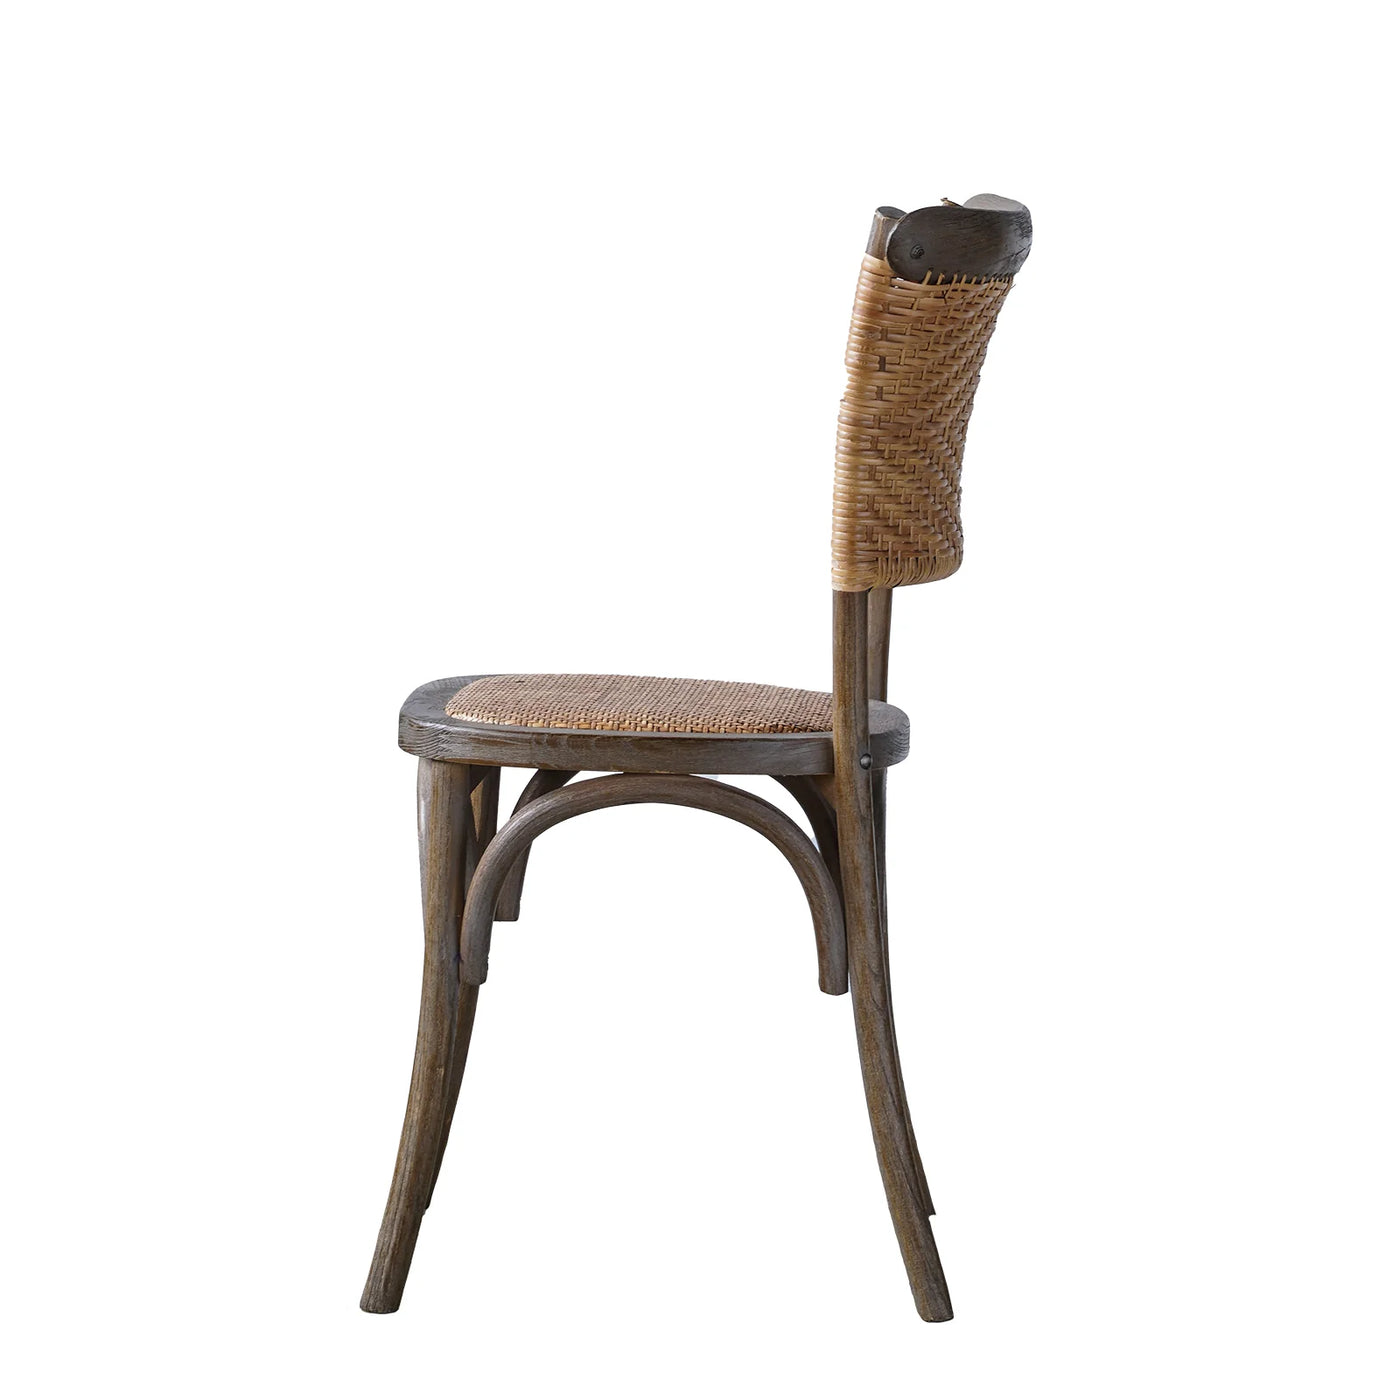 The Addie Dining Chair